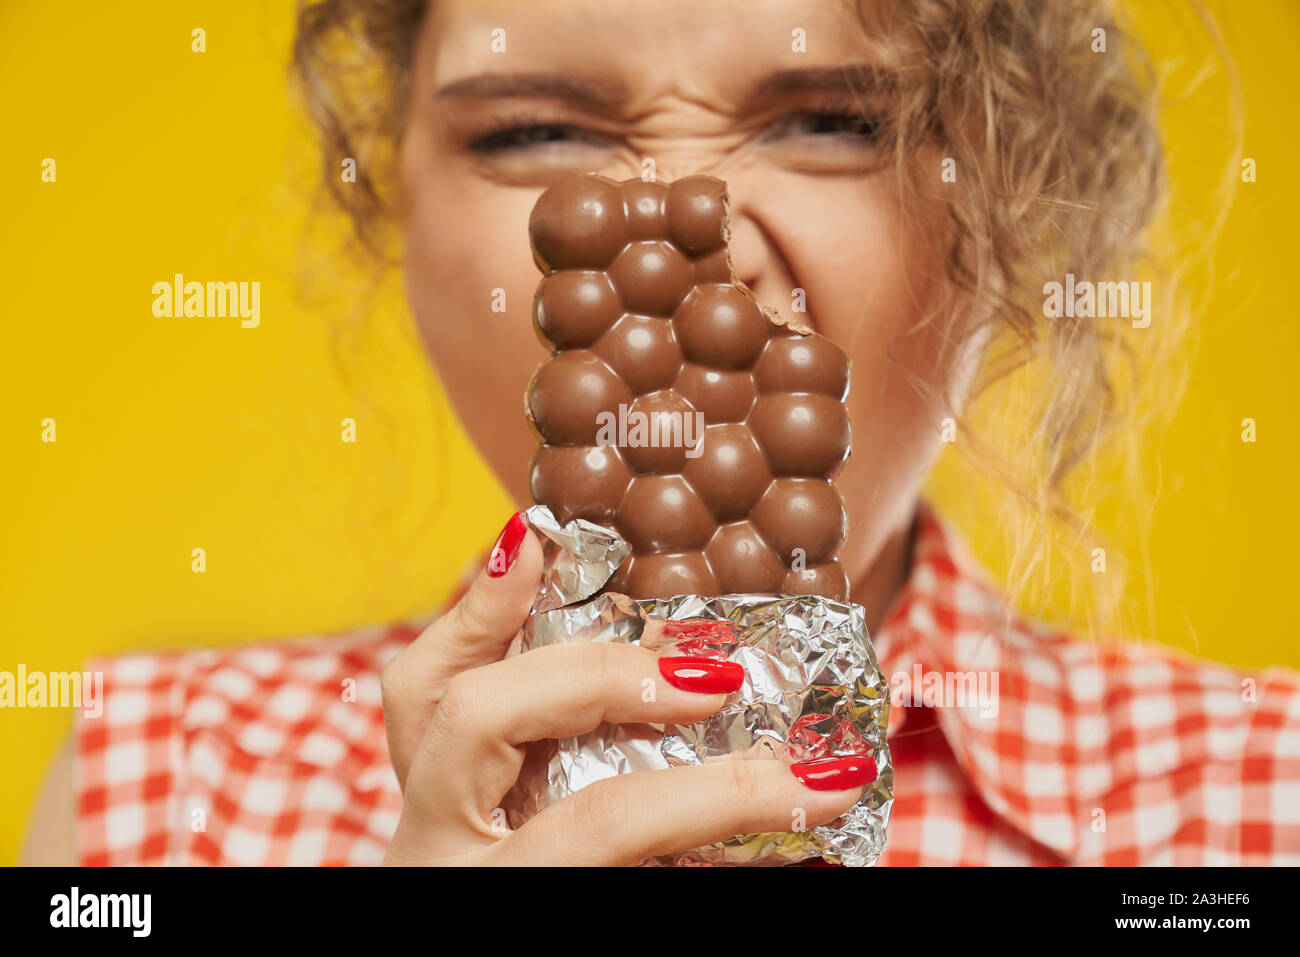 Close up of milk bubbly chocolate bitten from one side that keeping young blonde girl with curly hair and red nails over yellow background. Concept of temptation and pleasure during eating sweets Stock Photo